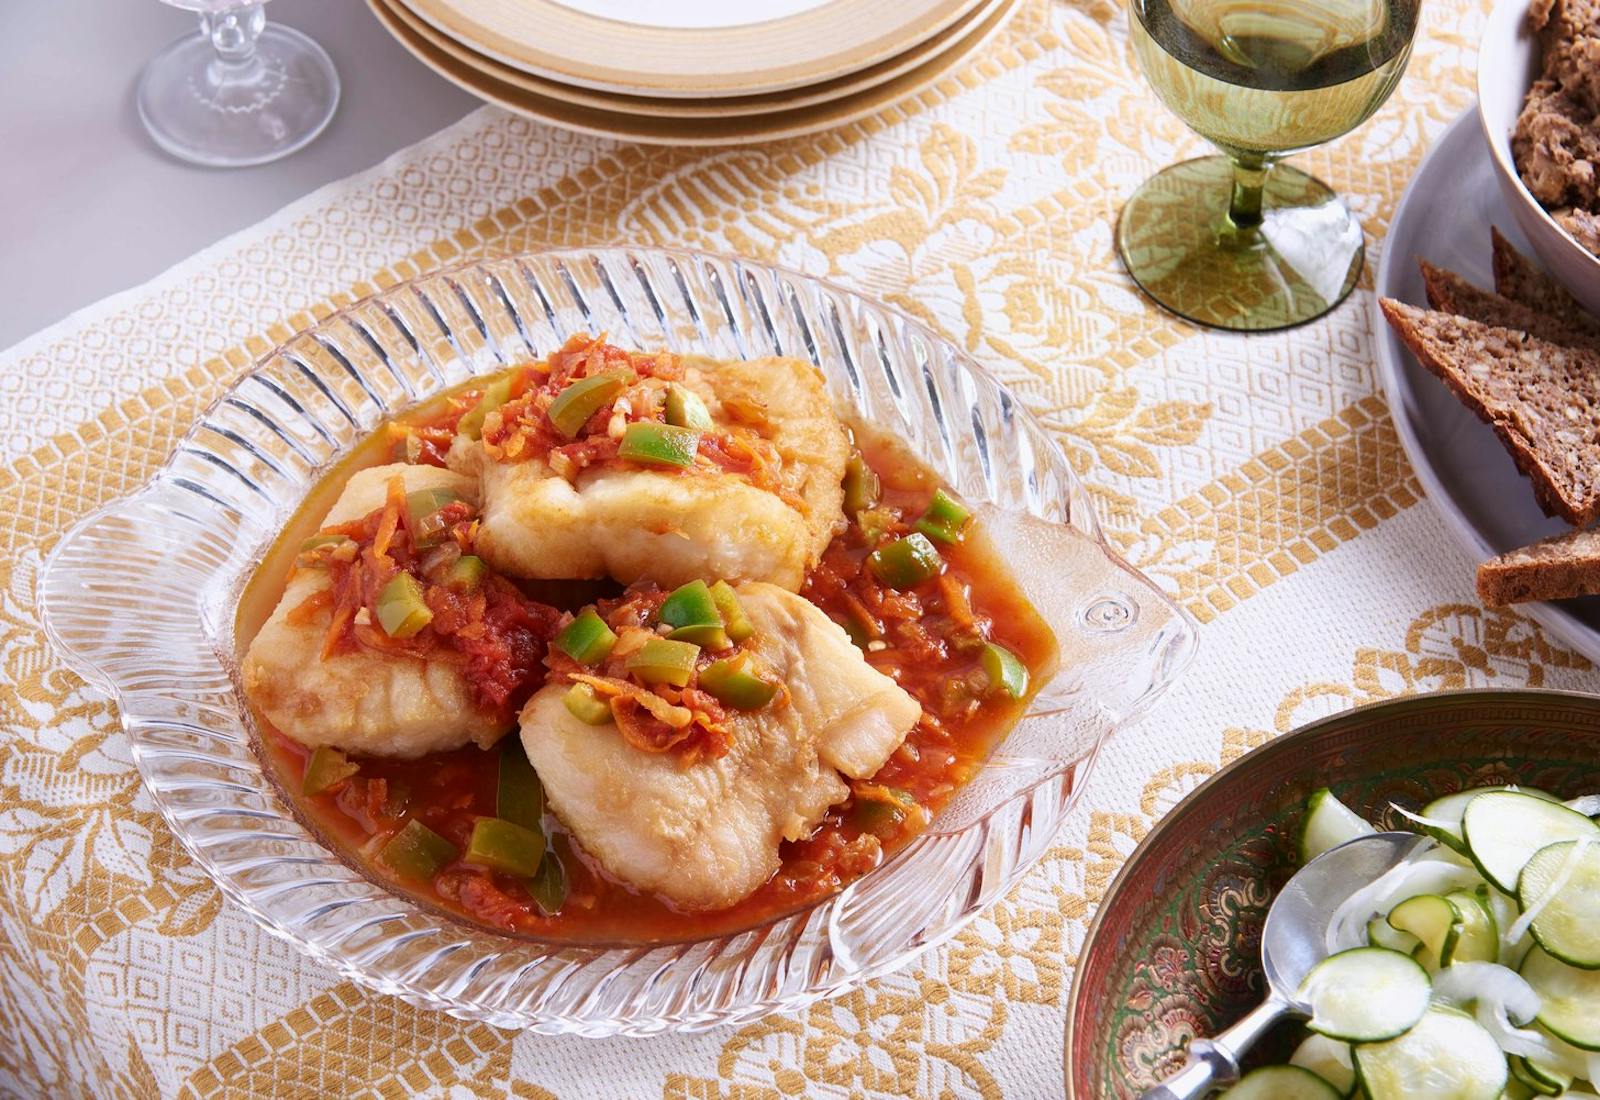 Baked fish in sweet and sour sauce in glass fish-shaped dish, alongside pickled cucumber salad, sliced bread and glass of white wine.